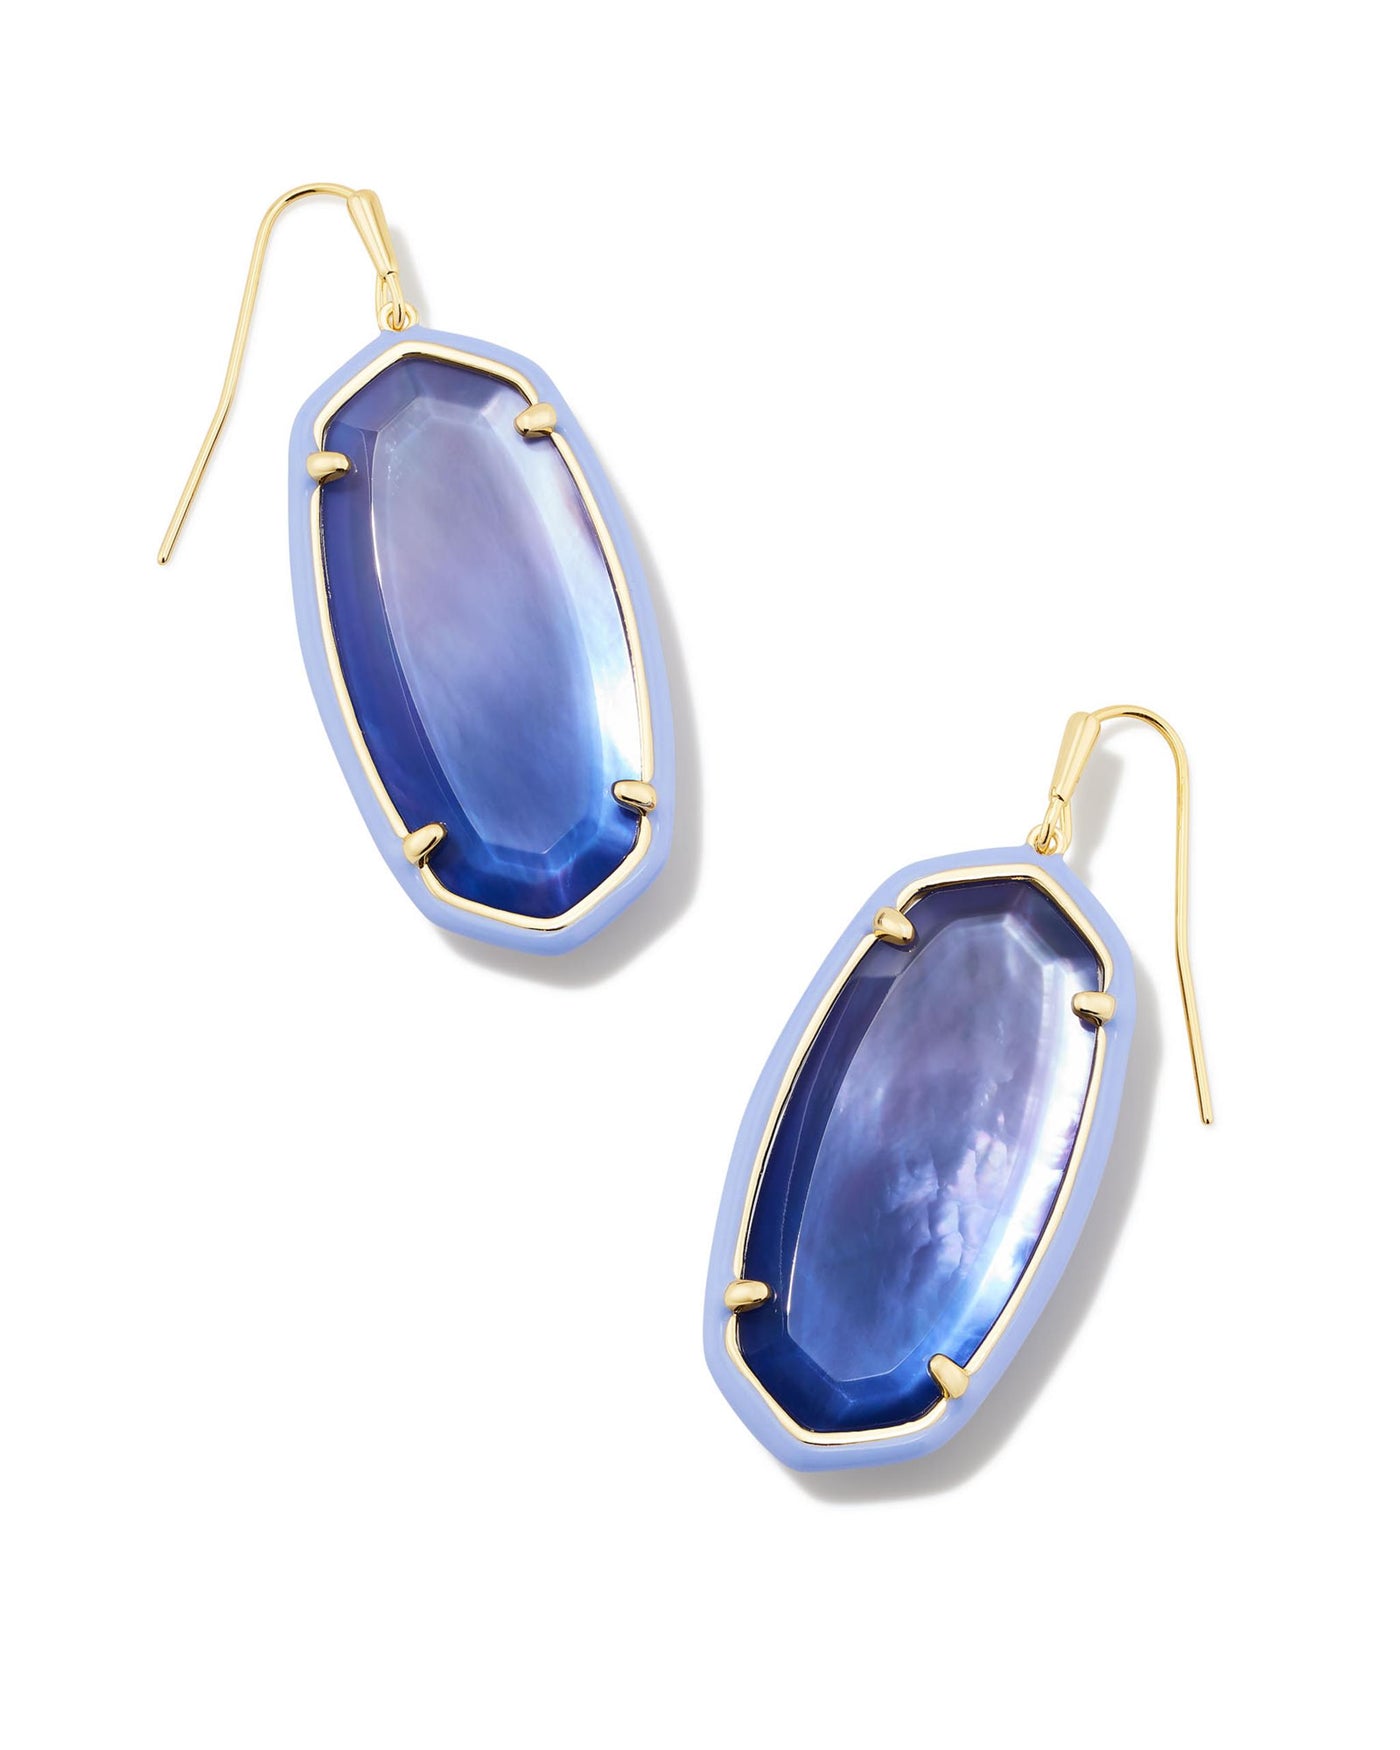 Gold Tone Earrings Featuring Dark Lavendar Ombre Illusion by Kendra Scott